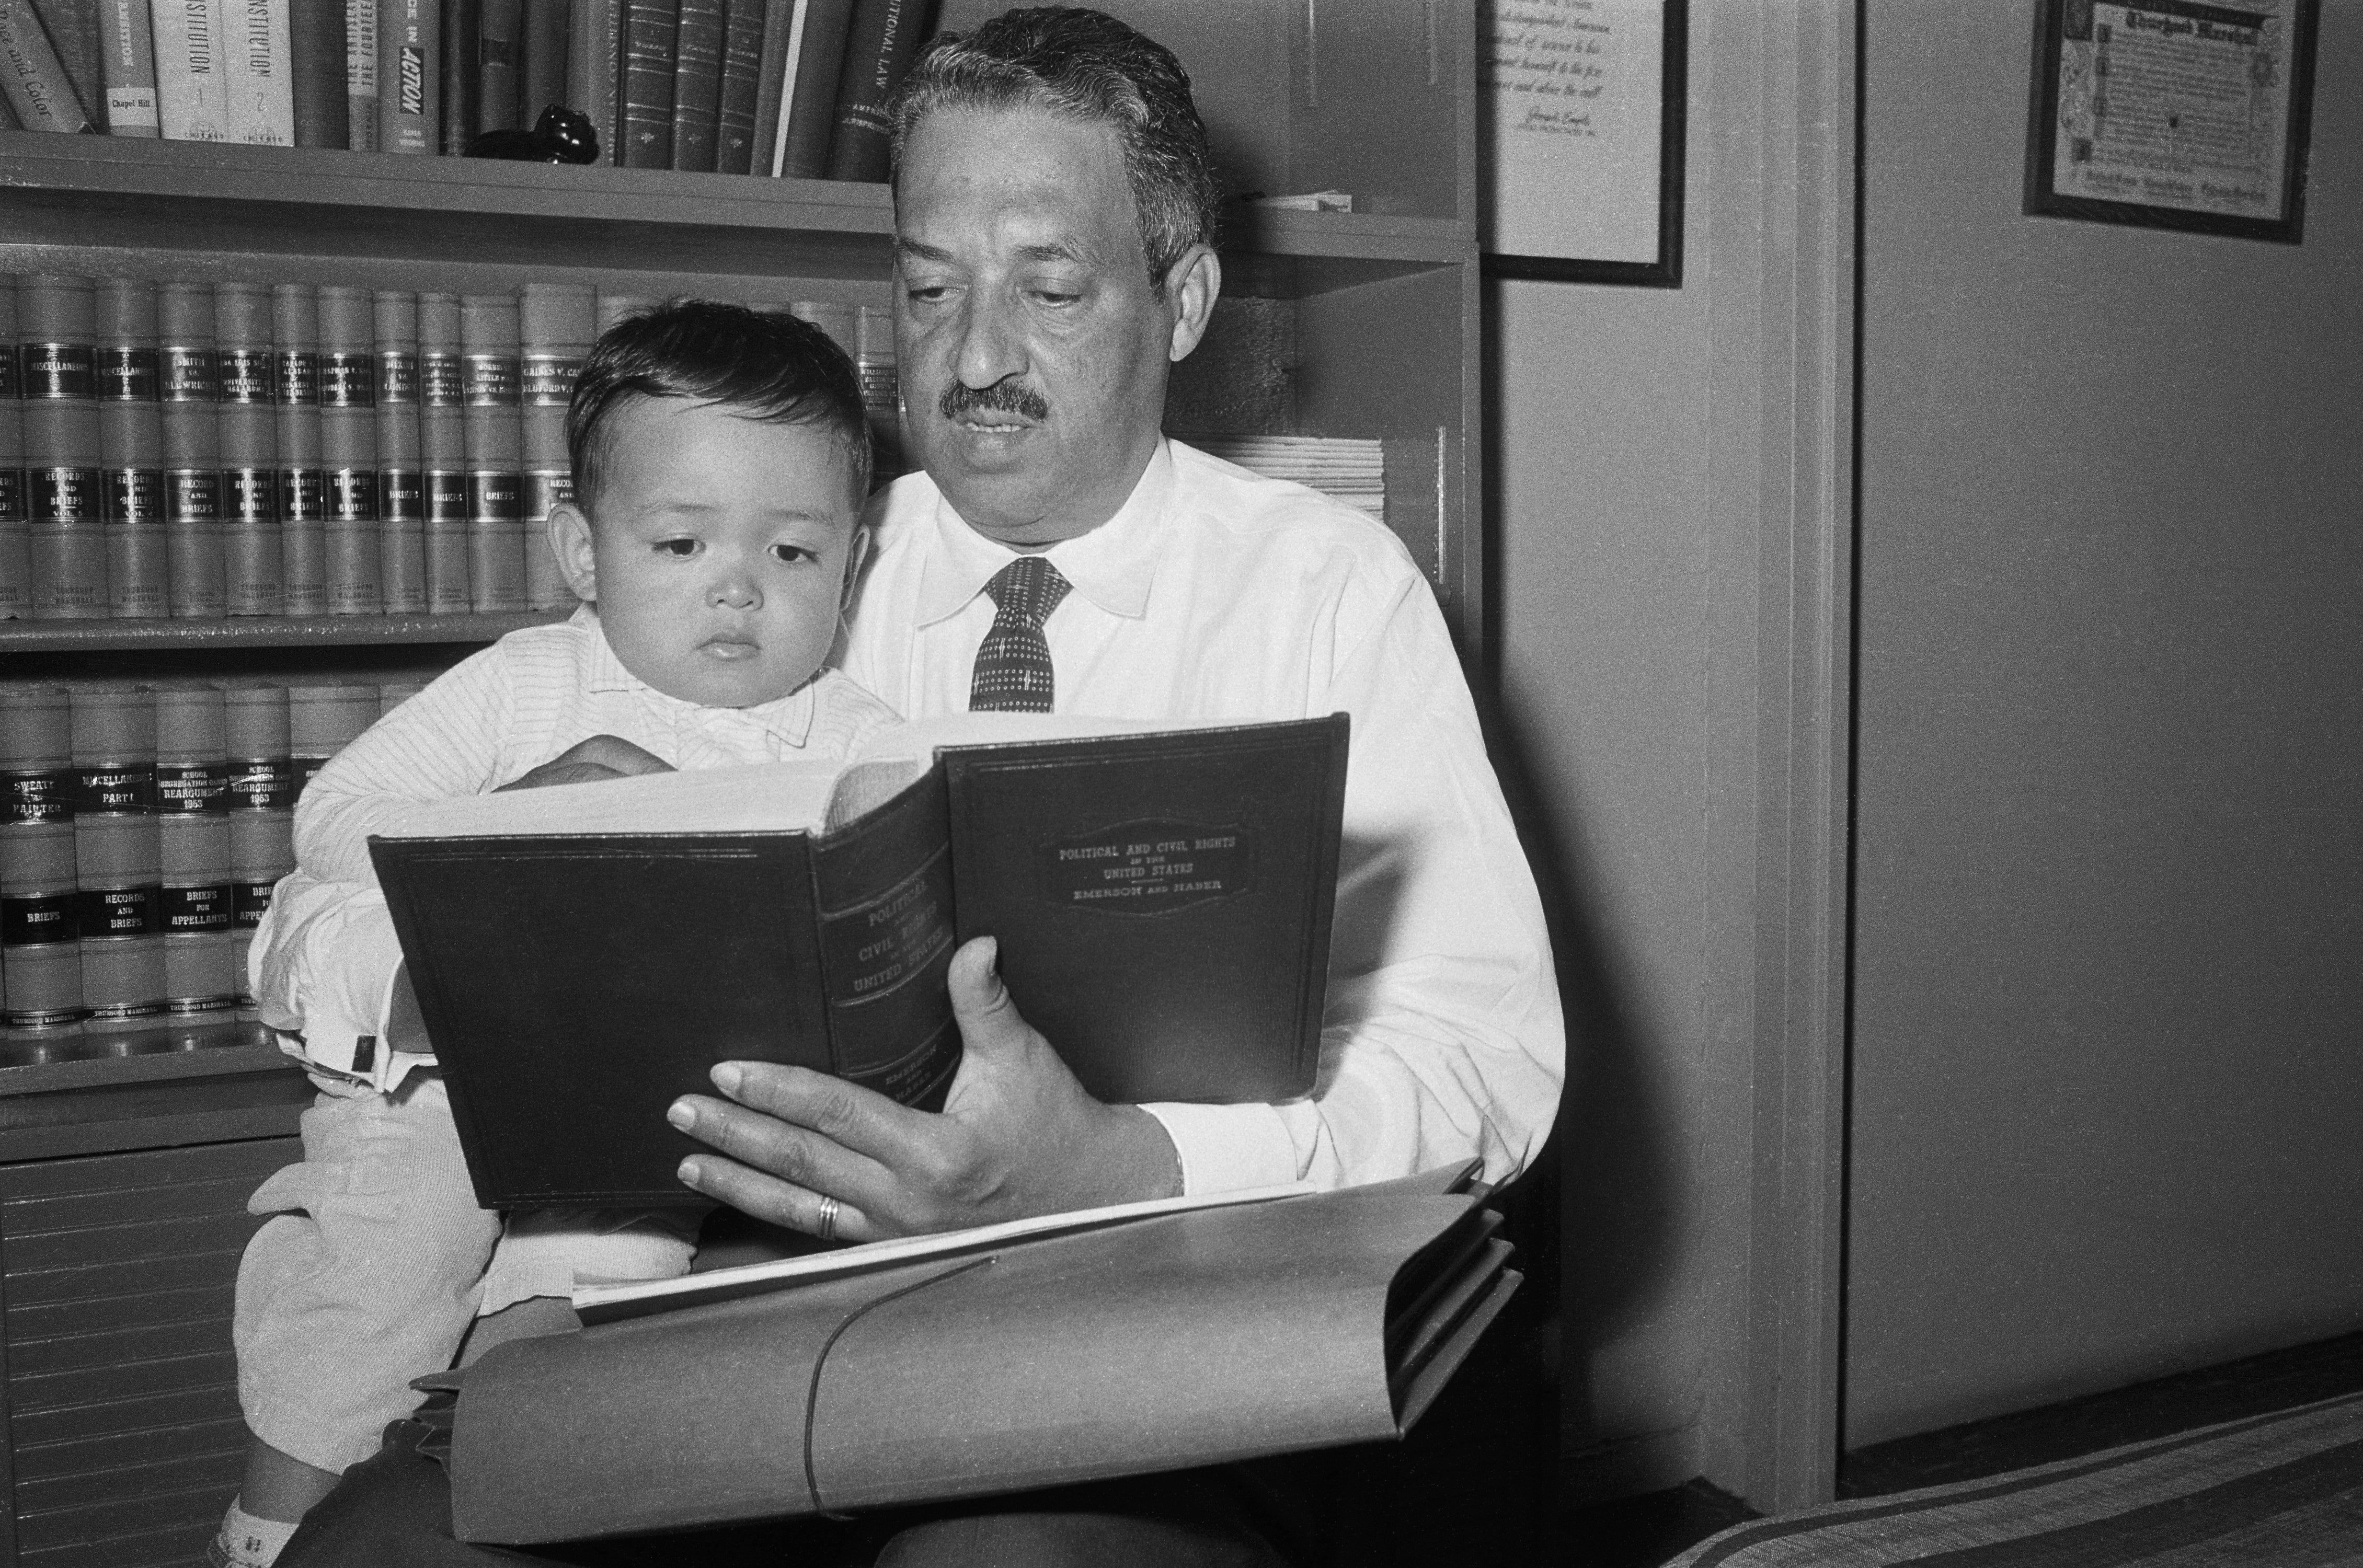 7 Things to Know About Thurgood Marshall Ahead of 'Marshall' Biopic
